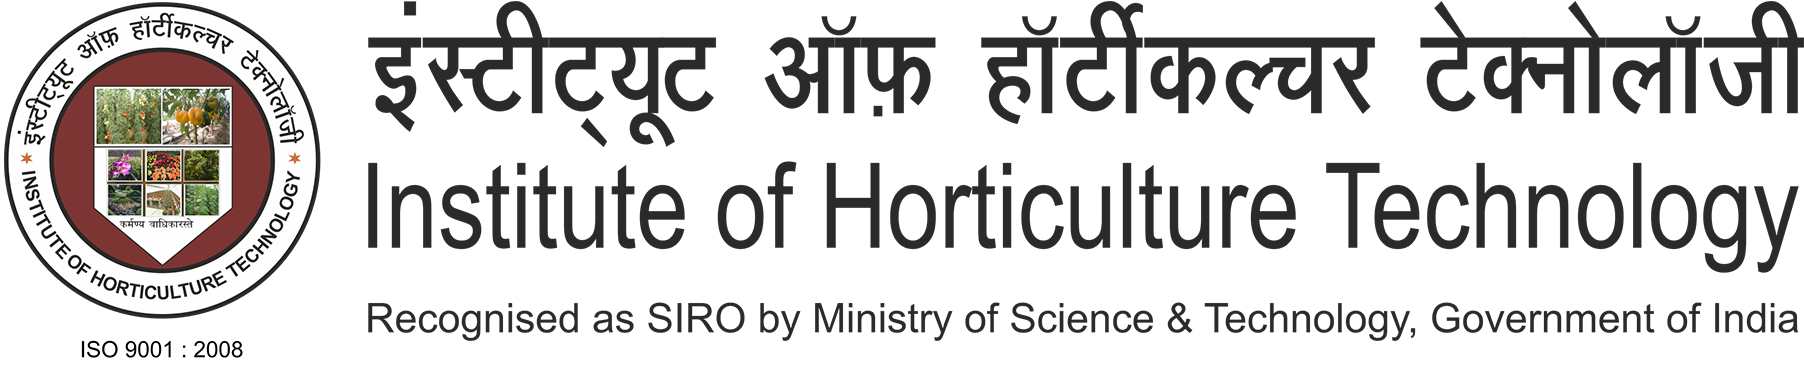 Institute of Horticulture Technology